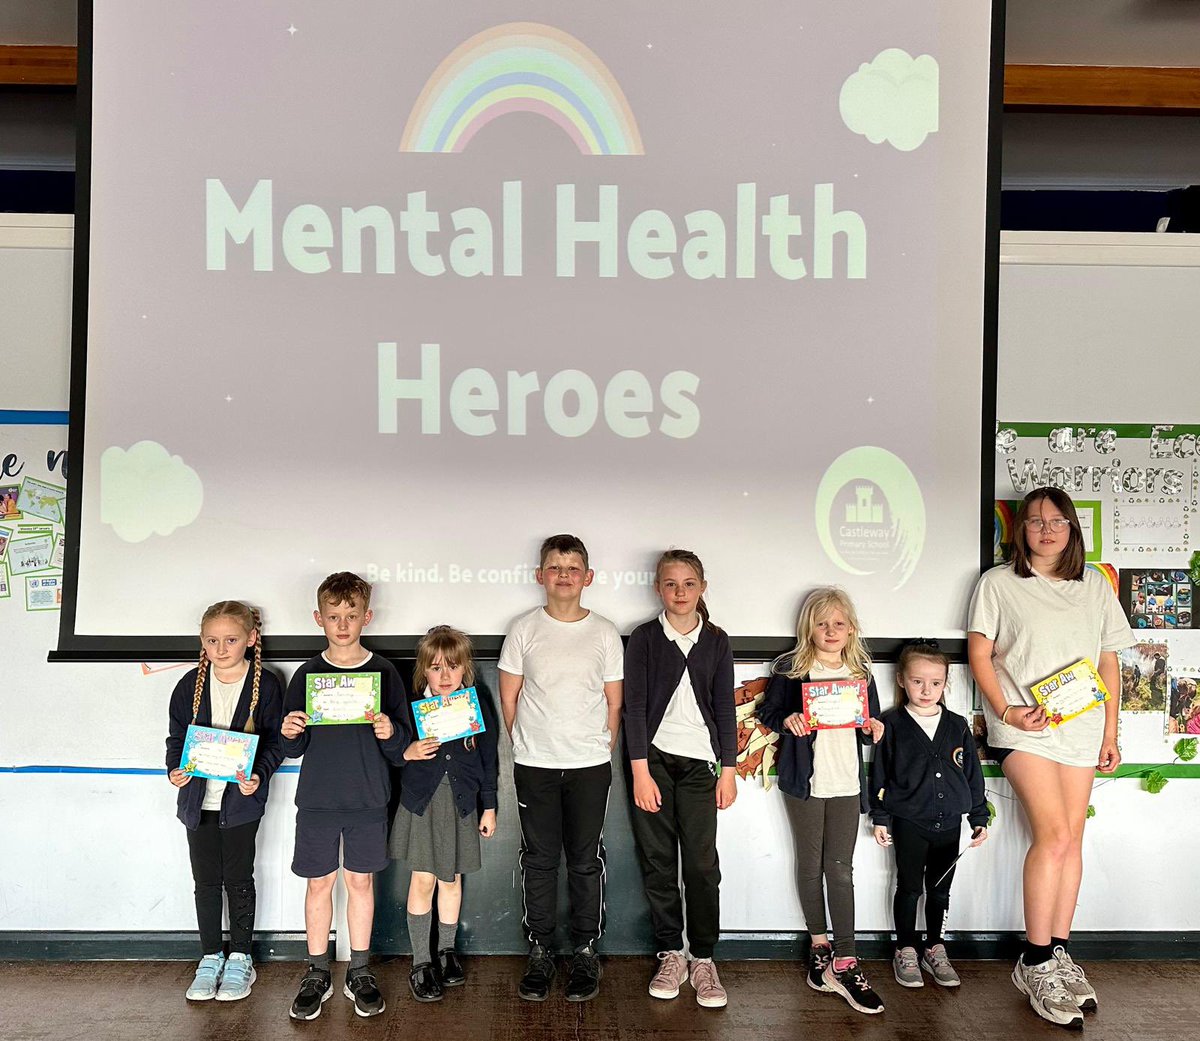 Our #MentalHealthHeroes have presented their latest set of awards. Remember that these awards are chosen by our children. Well done to all who have been spotted positively contributing to the mental health and wellbeing of others. #WeAreLookingAfterEachOther #WeAreCastleway